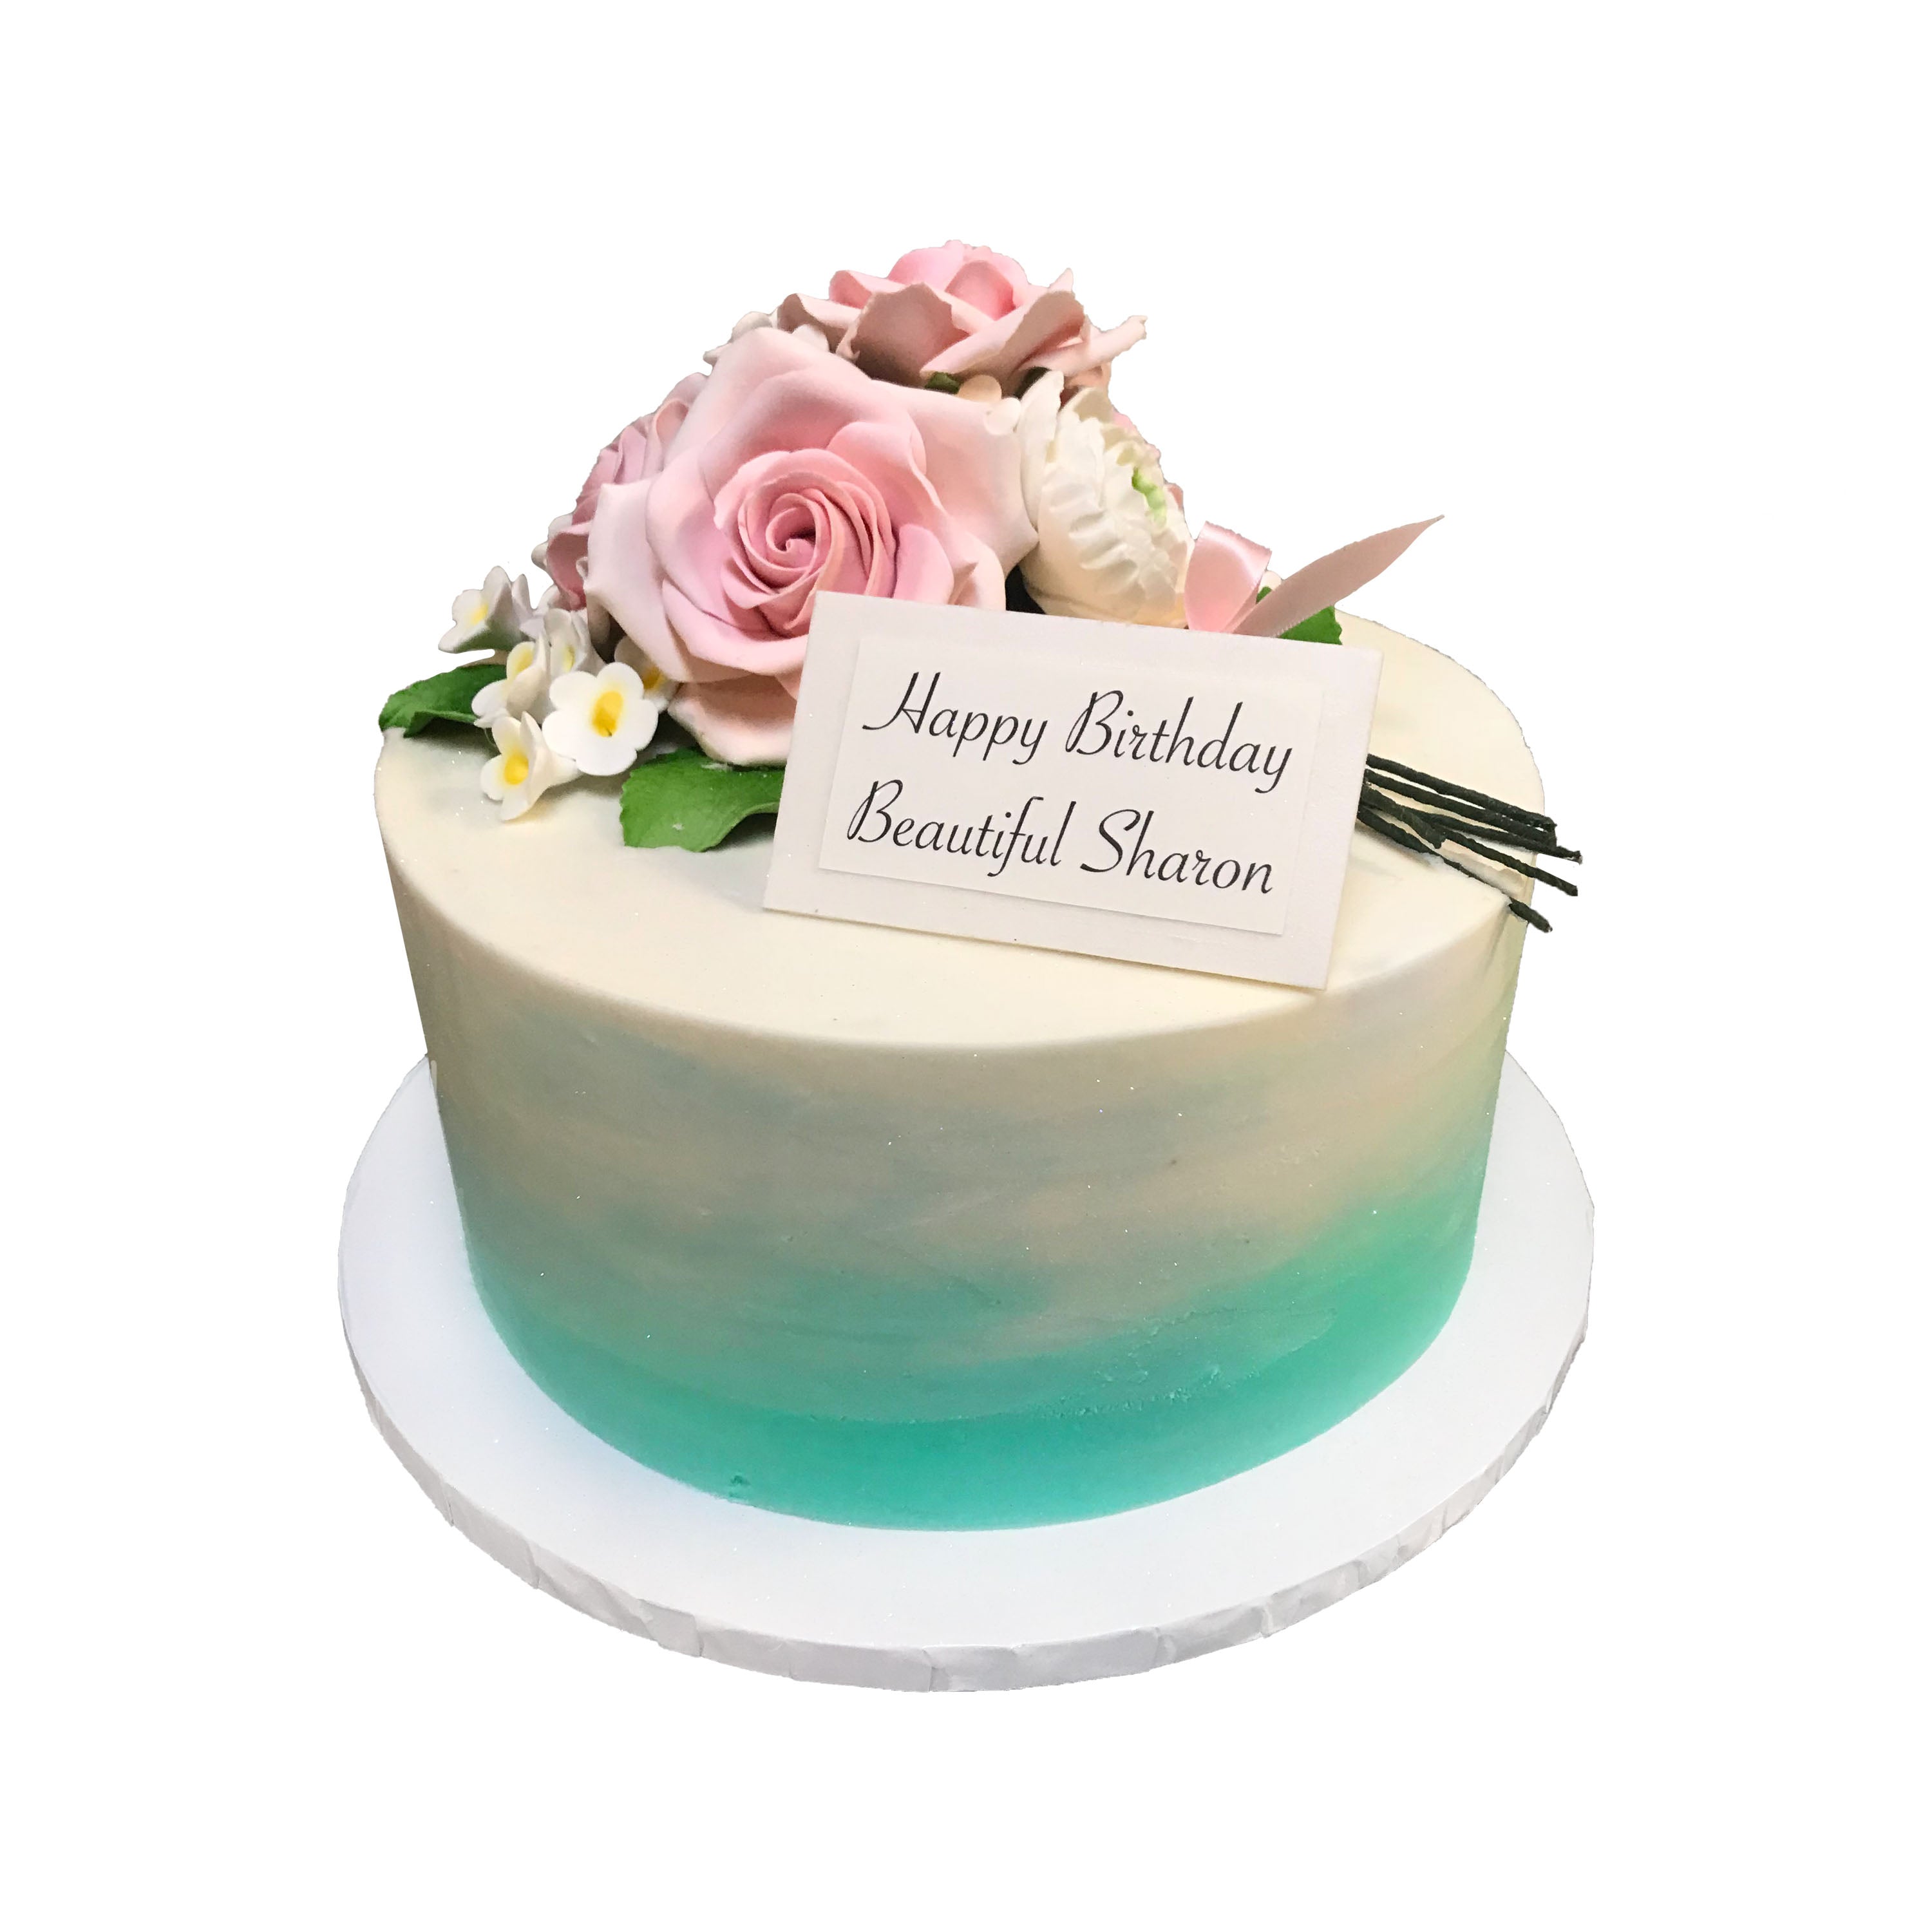 best cake for birthday Archives - Best Custom Birthday Cakes in NYC -  Delivery Available